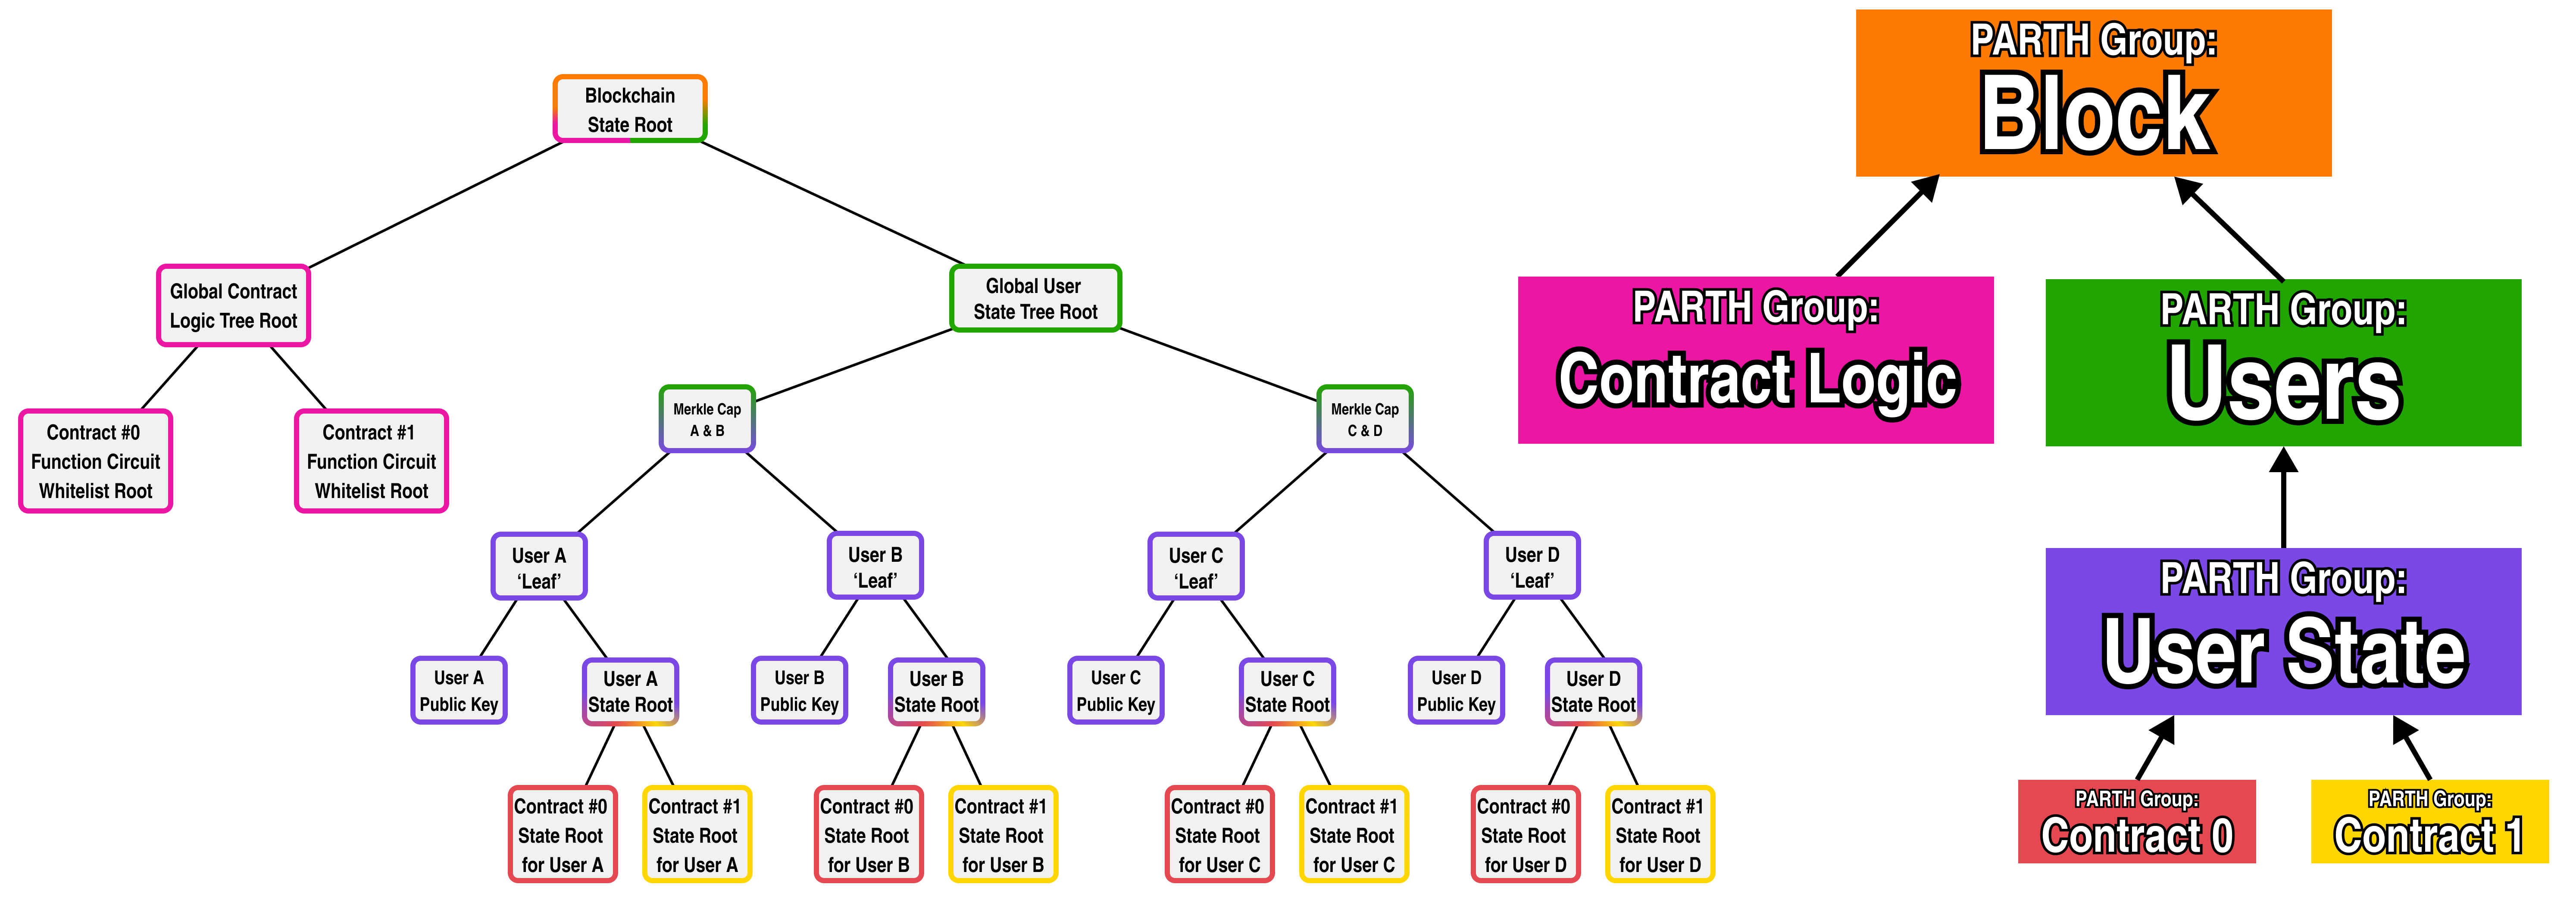 parth-group-contracts-uc-cl-pk.png